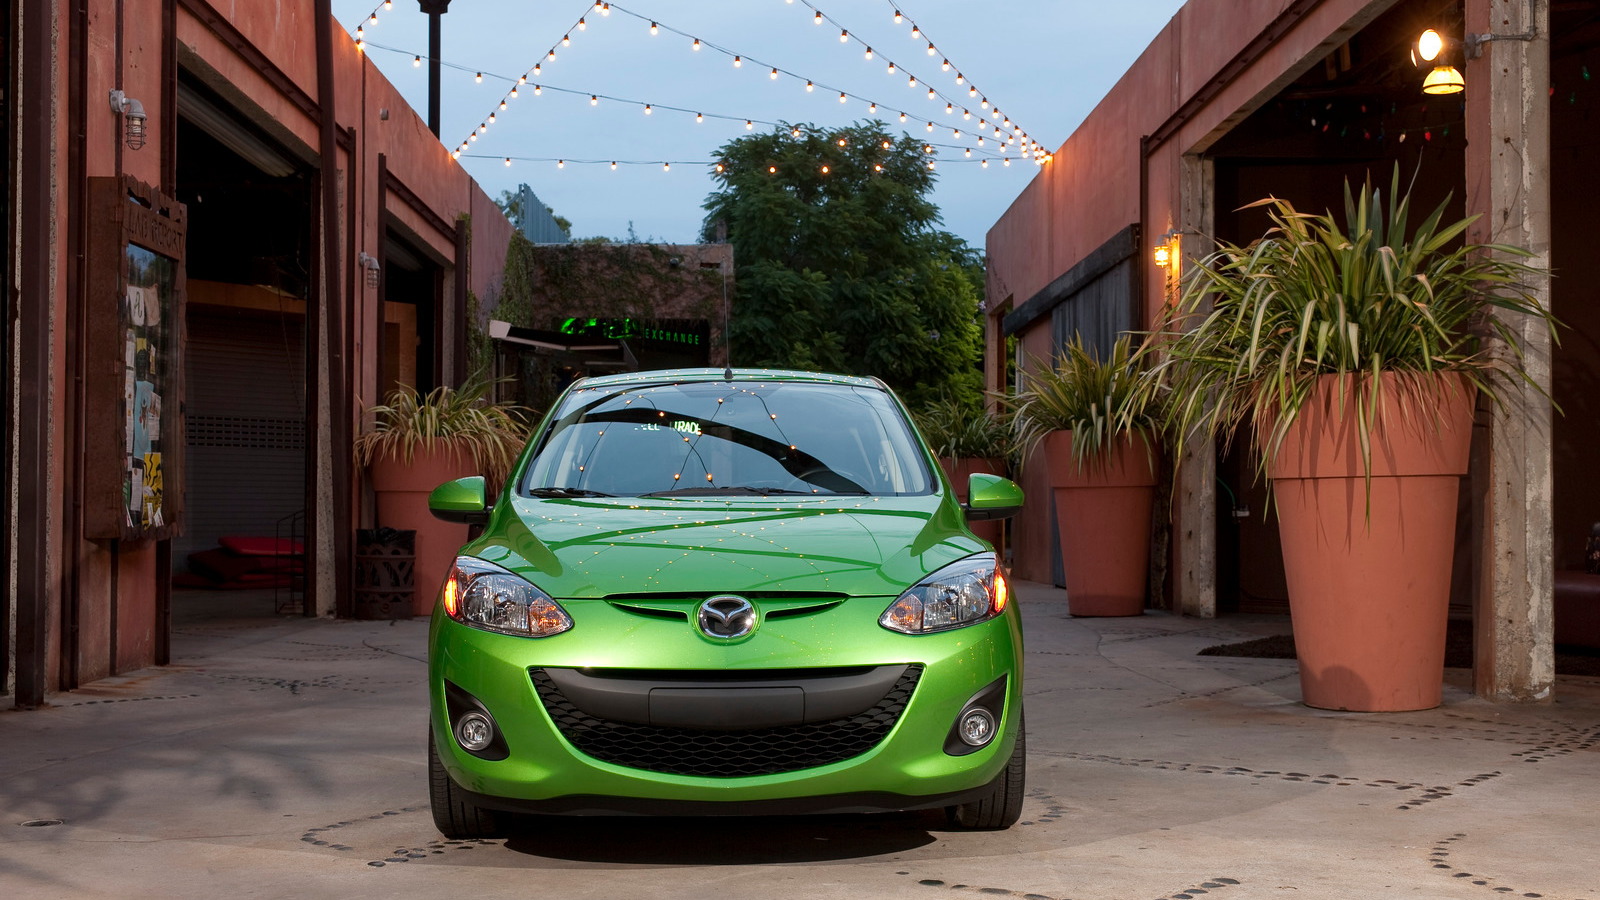 2011 Mazda2 exterior and detail